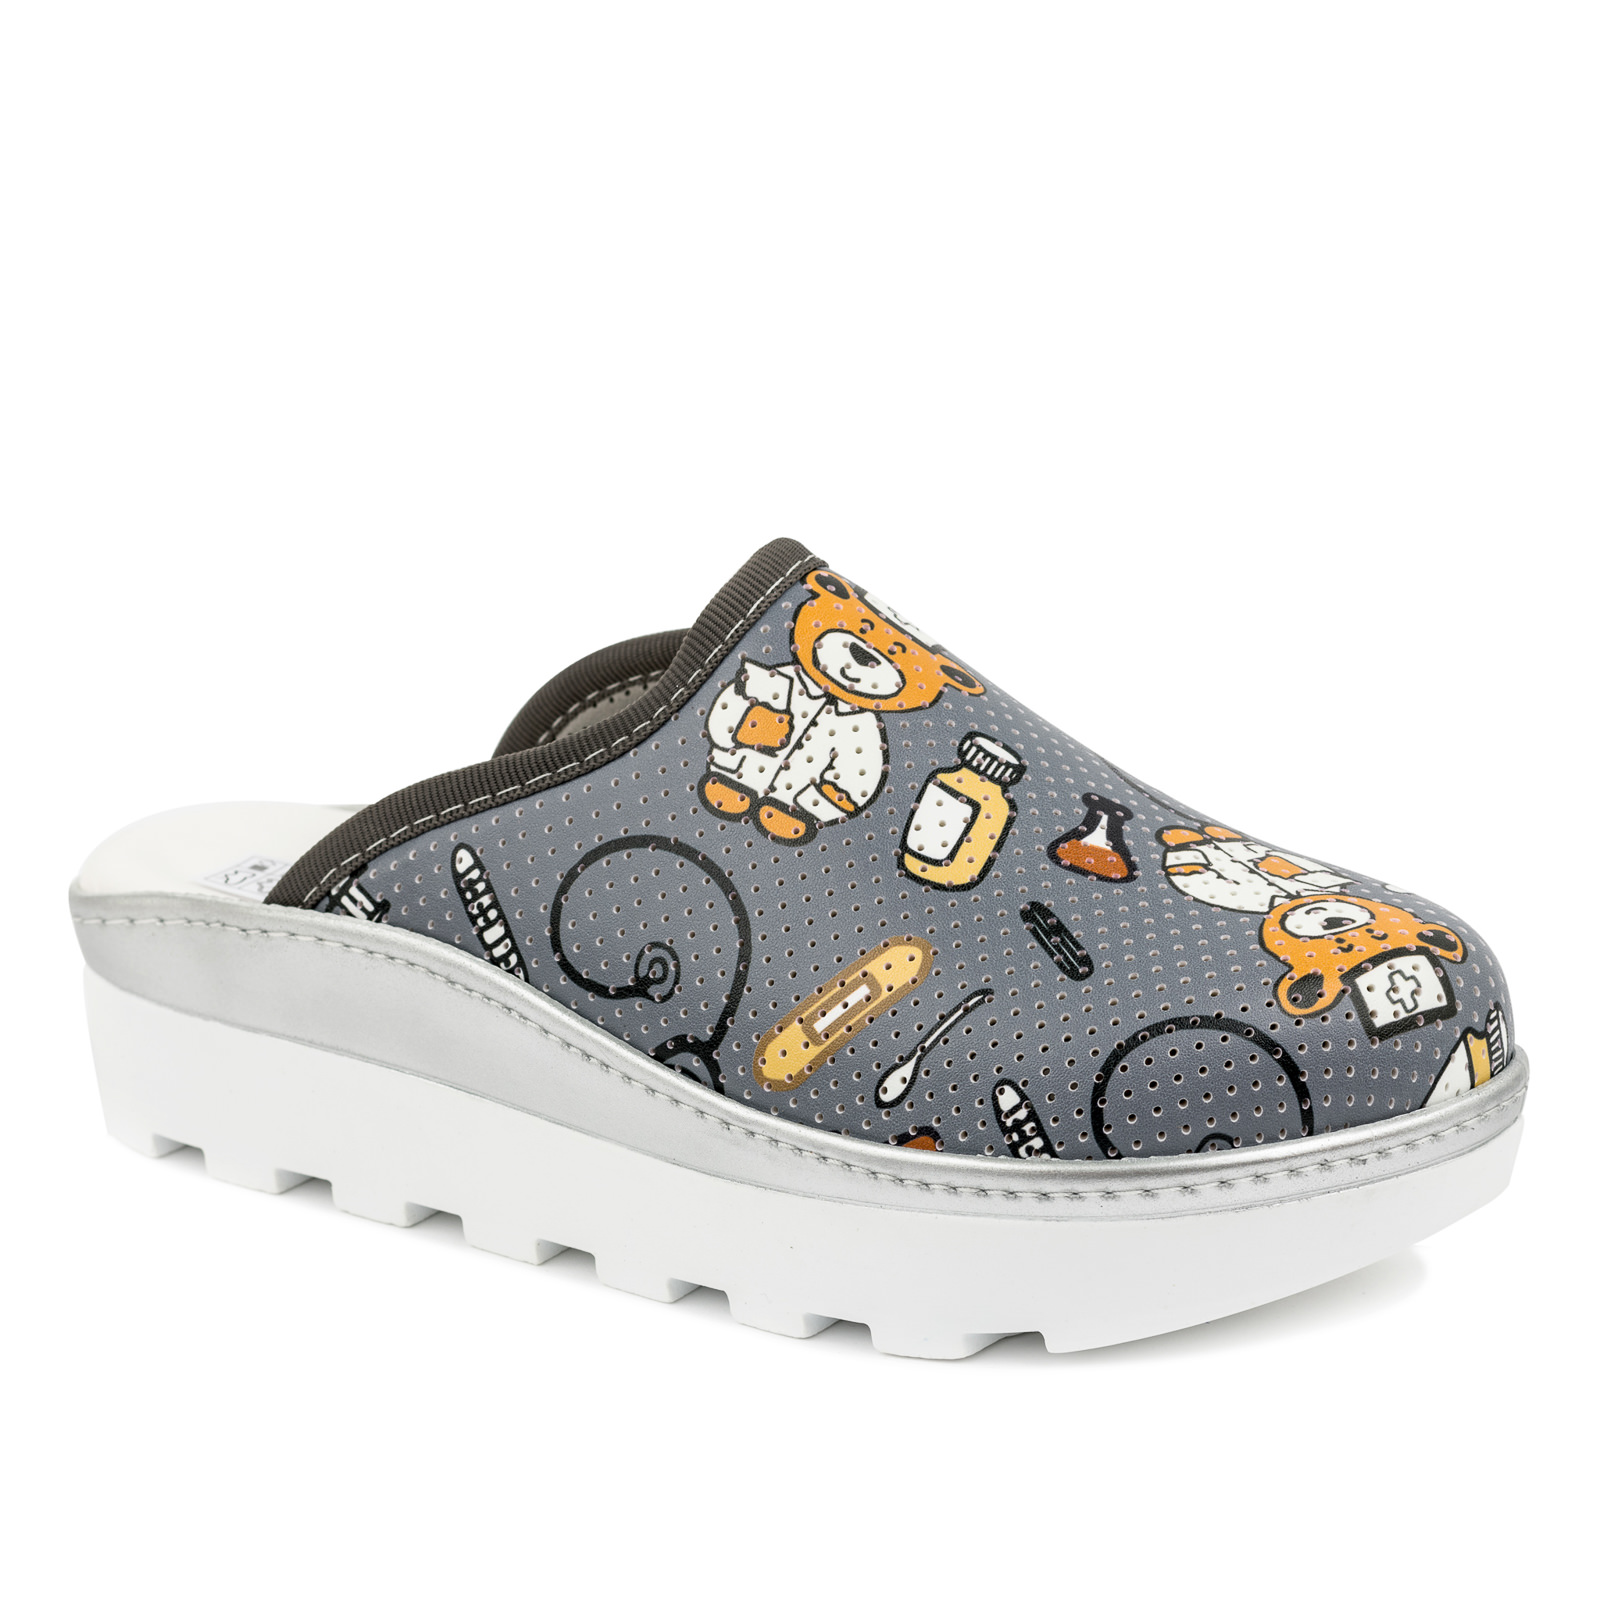 Patterned women clogs A042 - DOCTOR - GREY